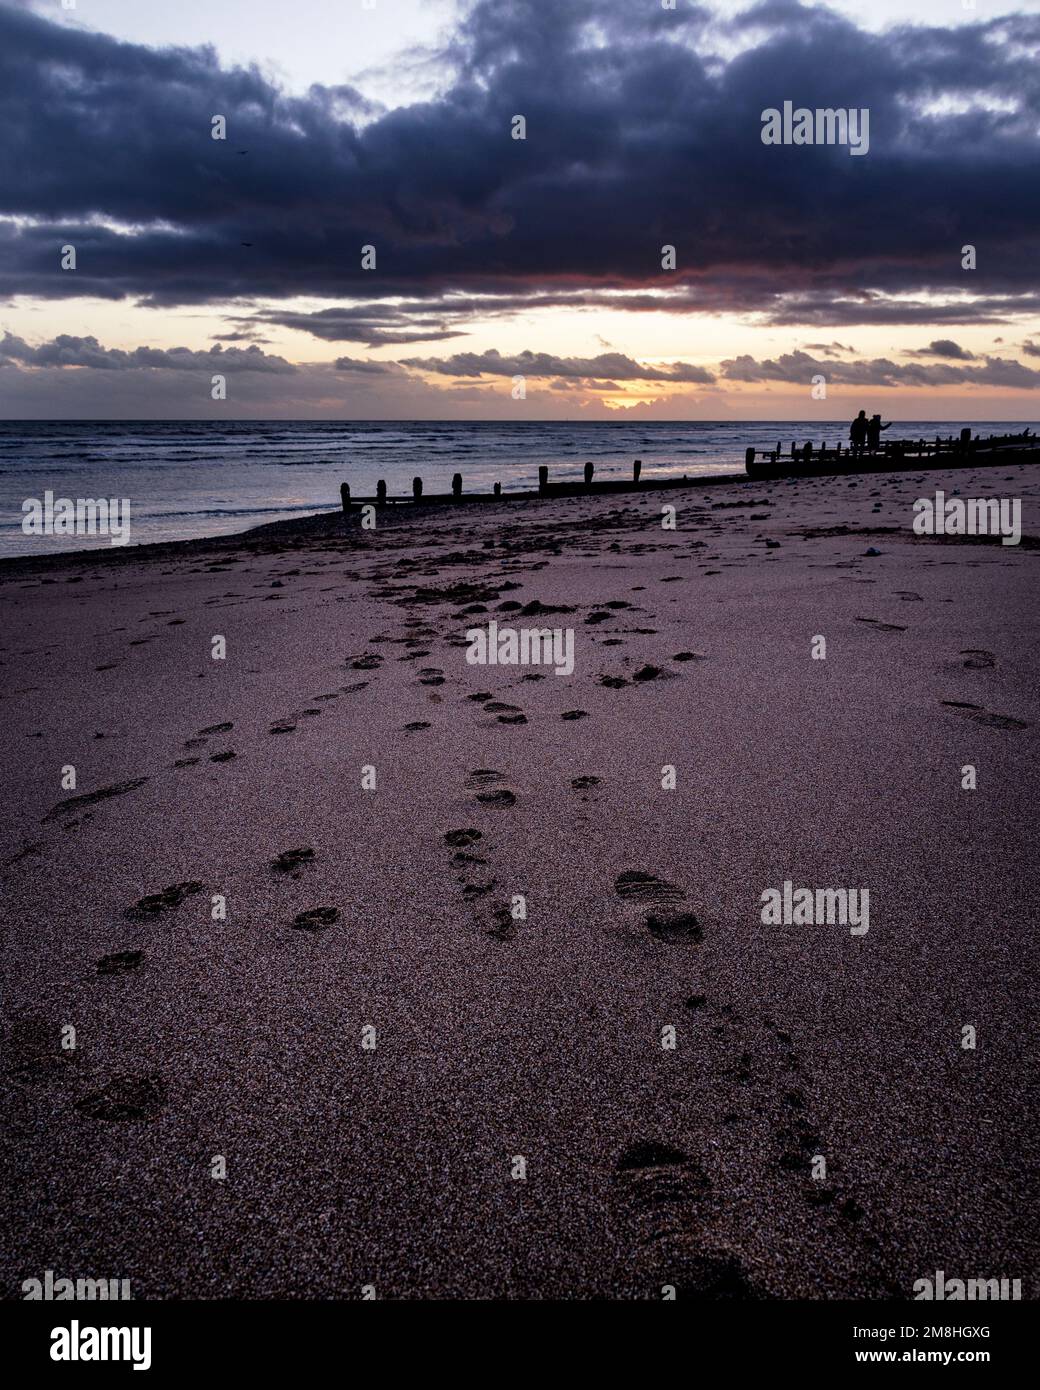 Footprints on the sand leading to the silhouette of two people at sunset on Worthing beach. Stock Photo